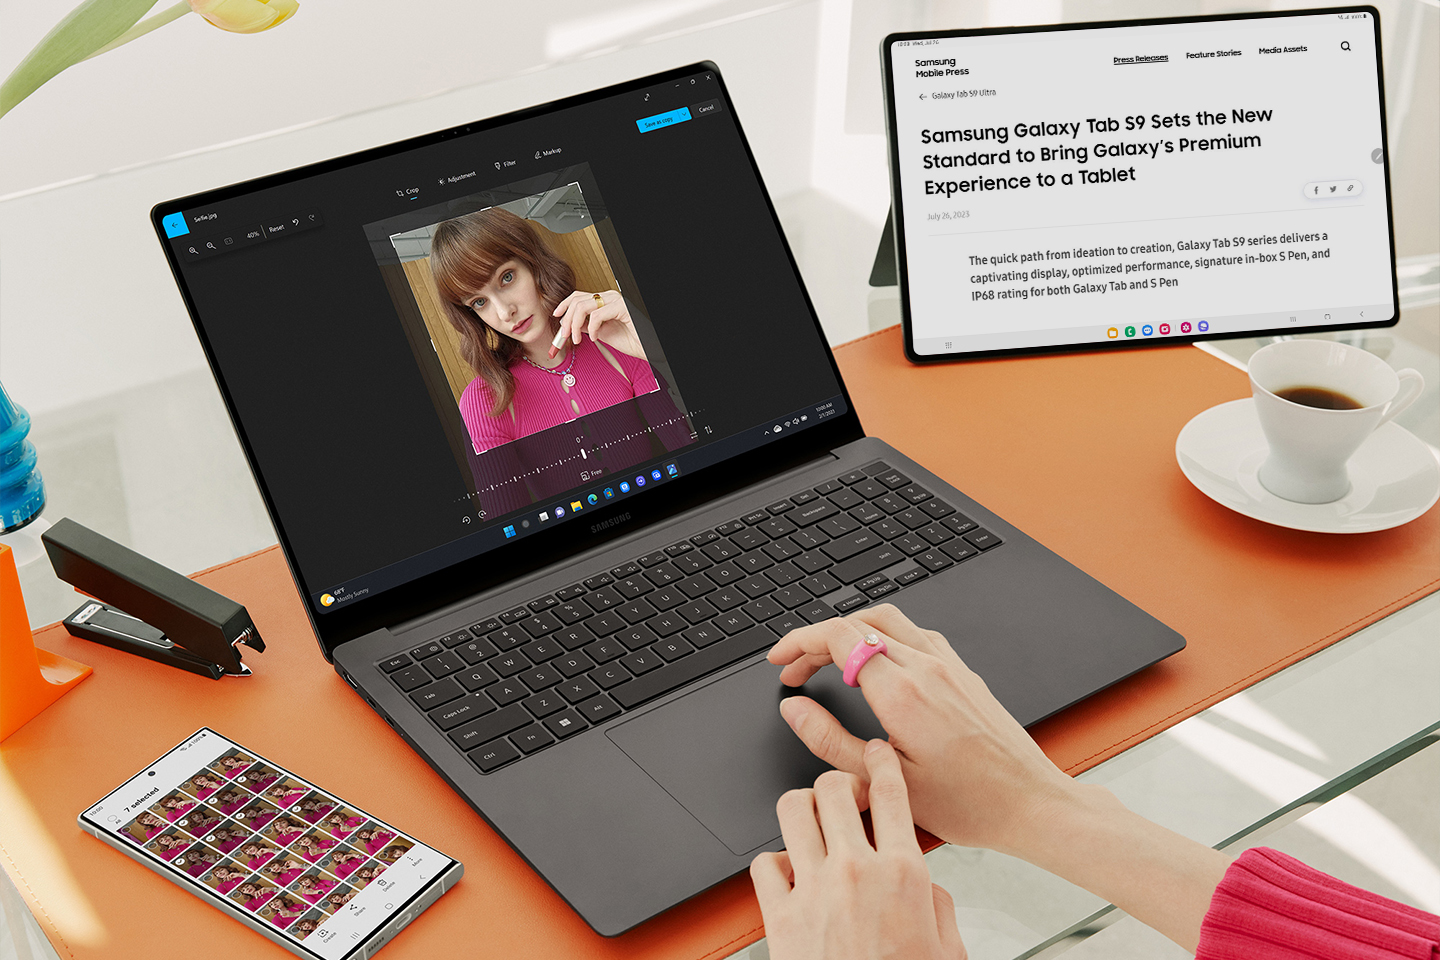 Image to illustrate 5 Galaxy Tab S9 tips for a Back-to-School productivity boost